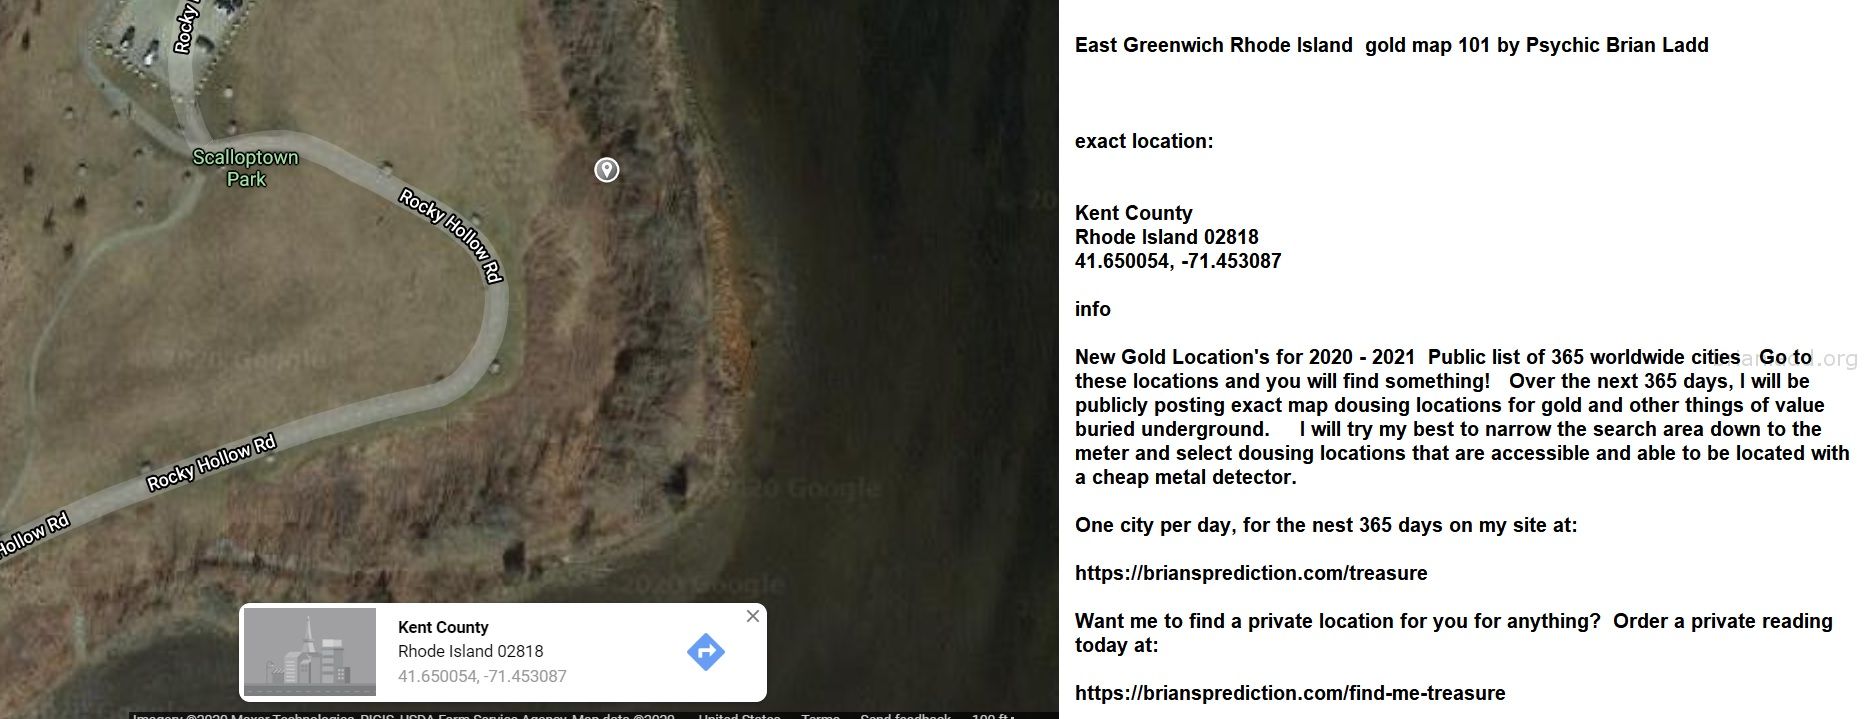 East Greenwich Rhode Island  gold map 101 by Psychic Brian Ladd
New Gold Location's for 2020 - 2021  Public list of 365 worldwide cities   Go to these locations and you will find something!   Over the next 365 days, I will be publicly posting exact map dousing locations for gold and other things of value buried underground.     I will try my best to narrow the search area down to the meter and select dousing locations that are accessible and able to be located with a cheap metal detector. One city per day, for the nest 365 days on my site at:  https://briansprediction.com/treasure  Want me to find a private location for you for anything?  Order a private reading today at:  https://briansprediction.com/find-me-treasure
